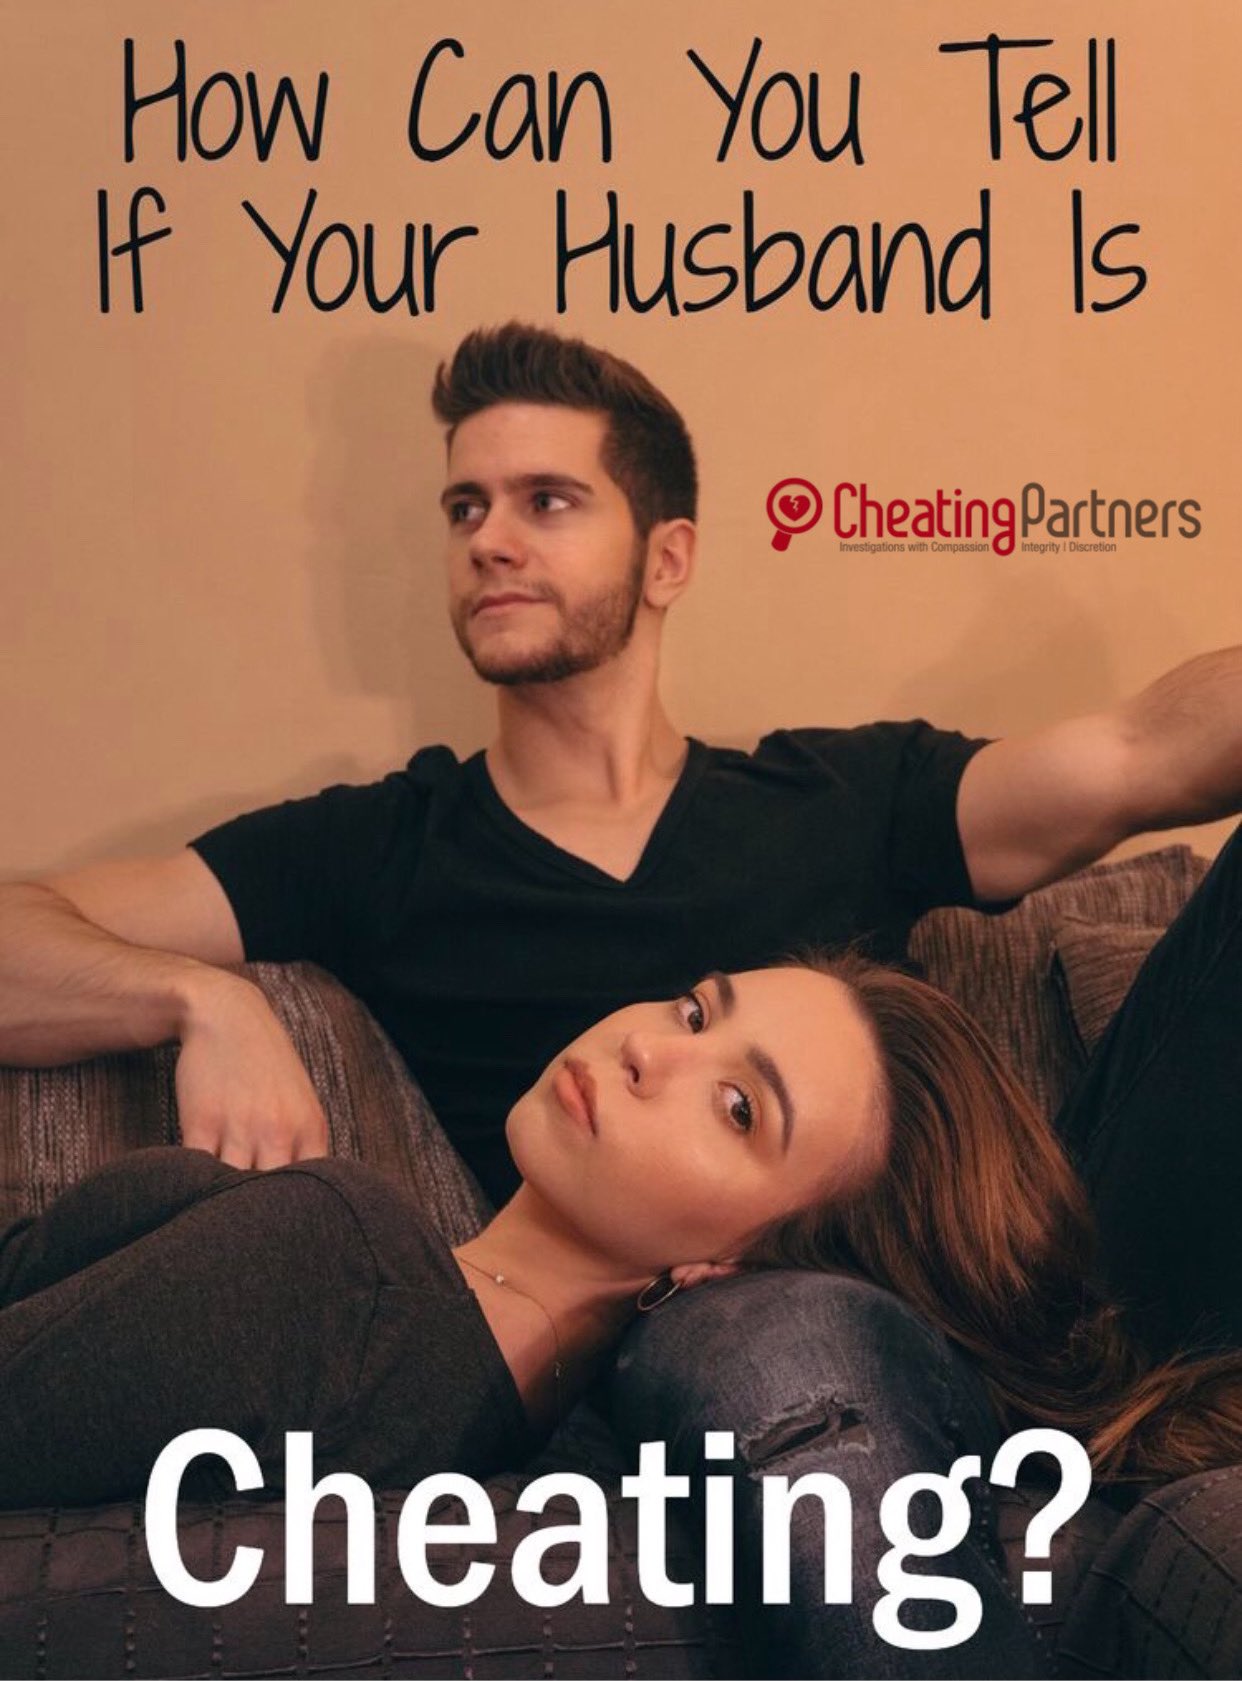 Ways to find out if your husband is cheating